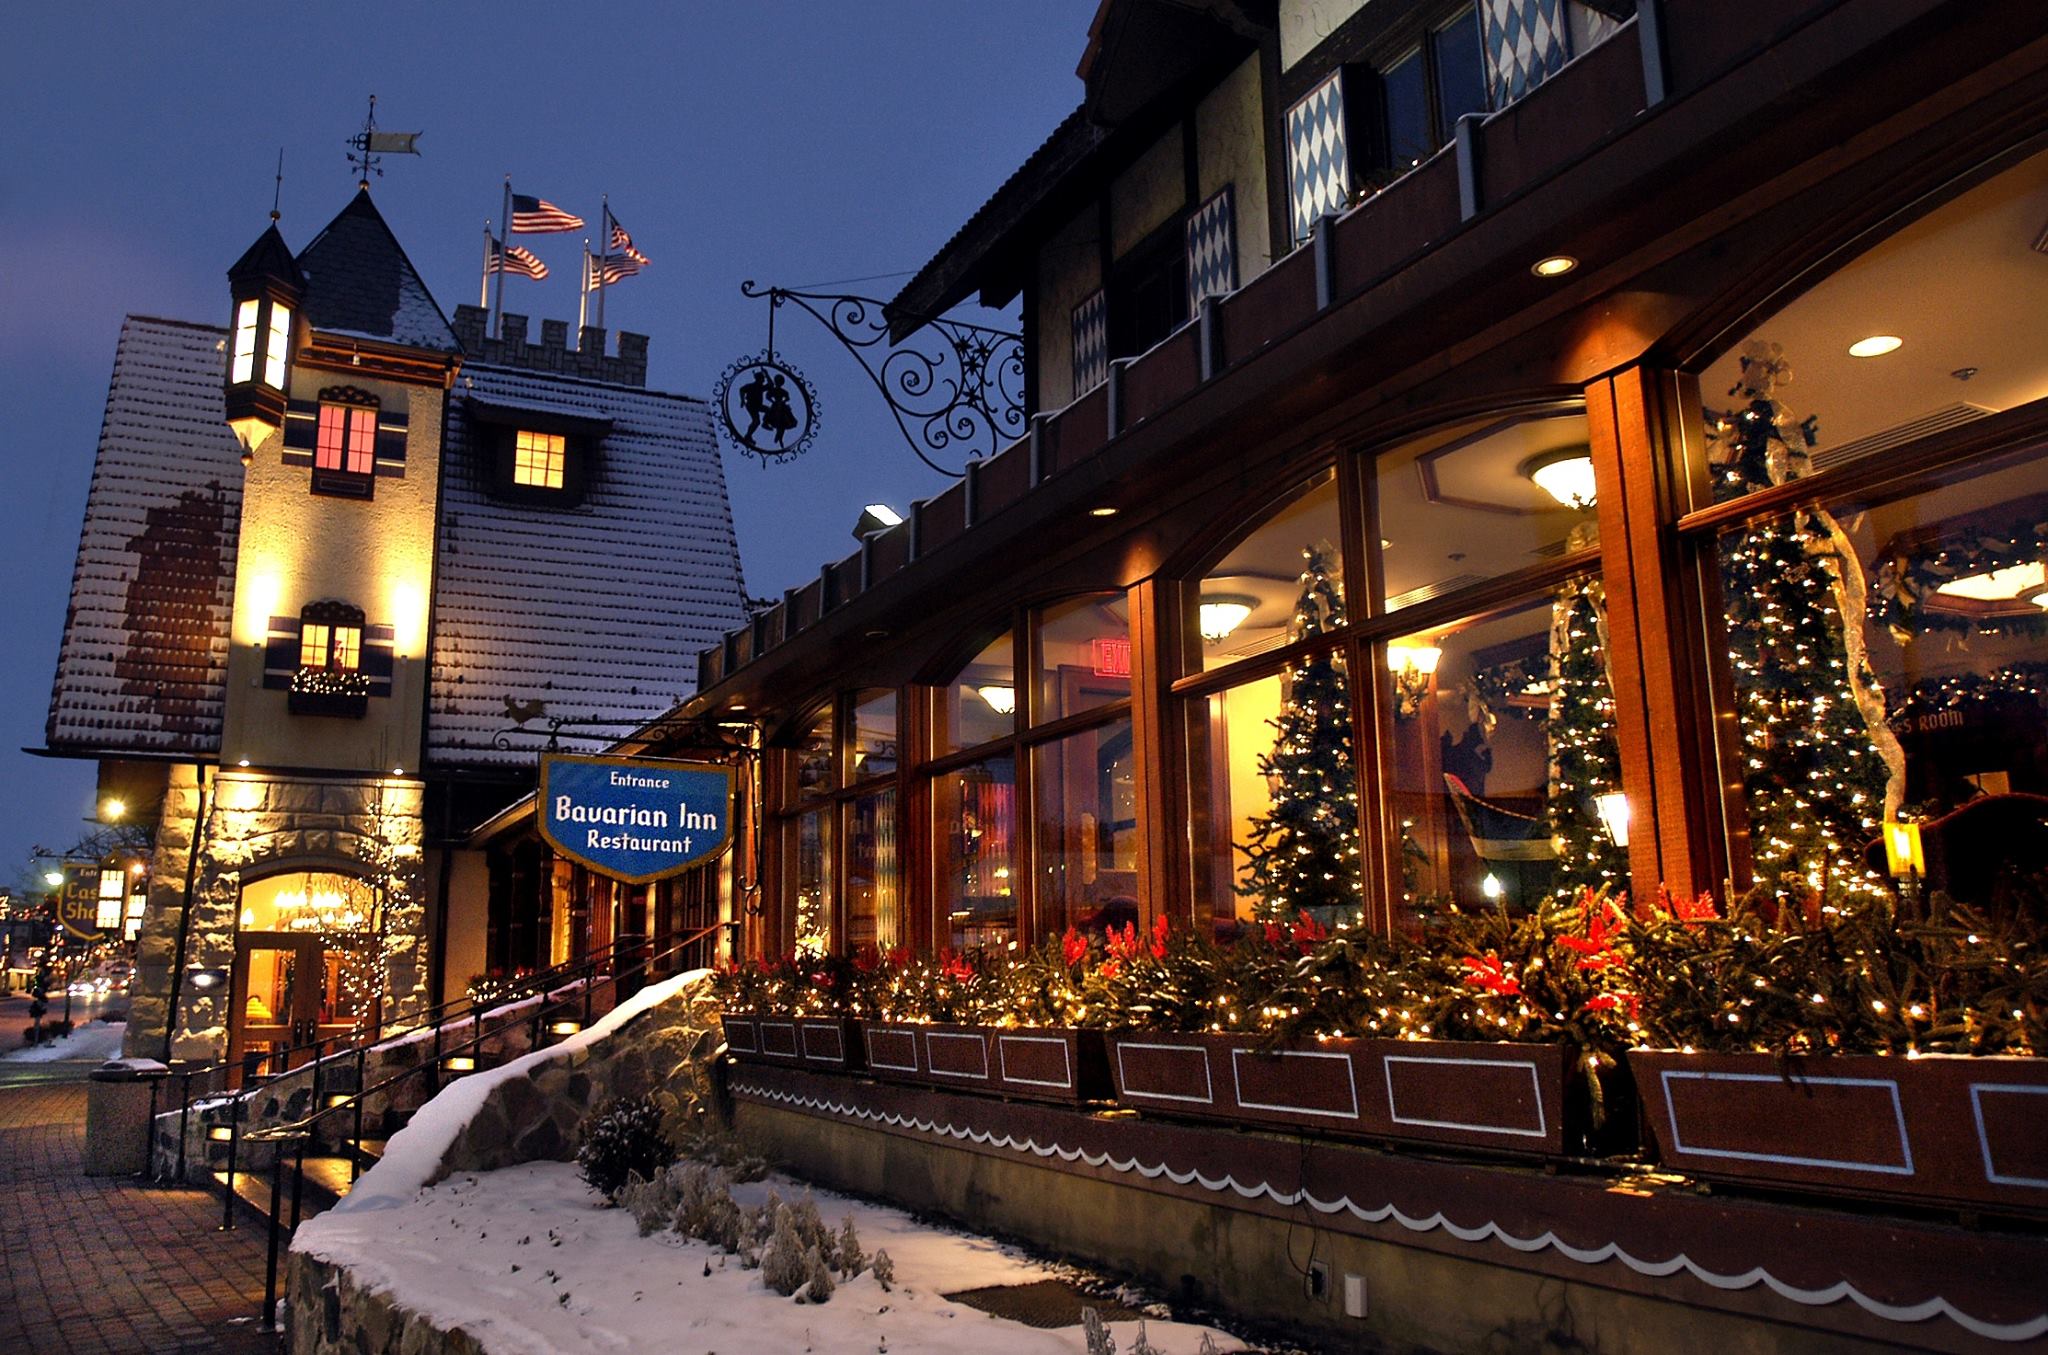 Frankenmuth: A Charming Christmas Village In Michigan